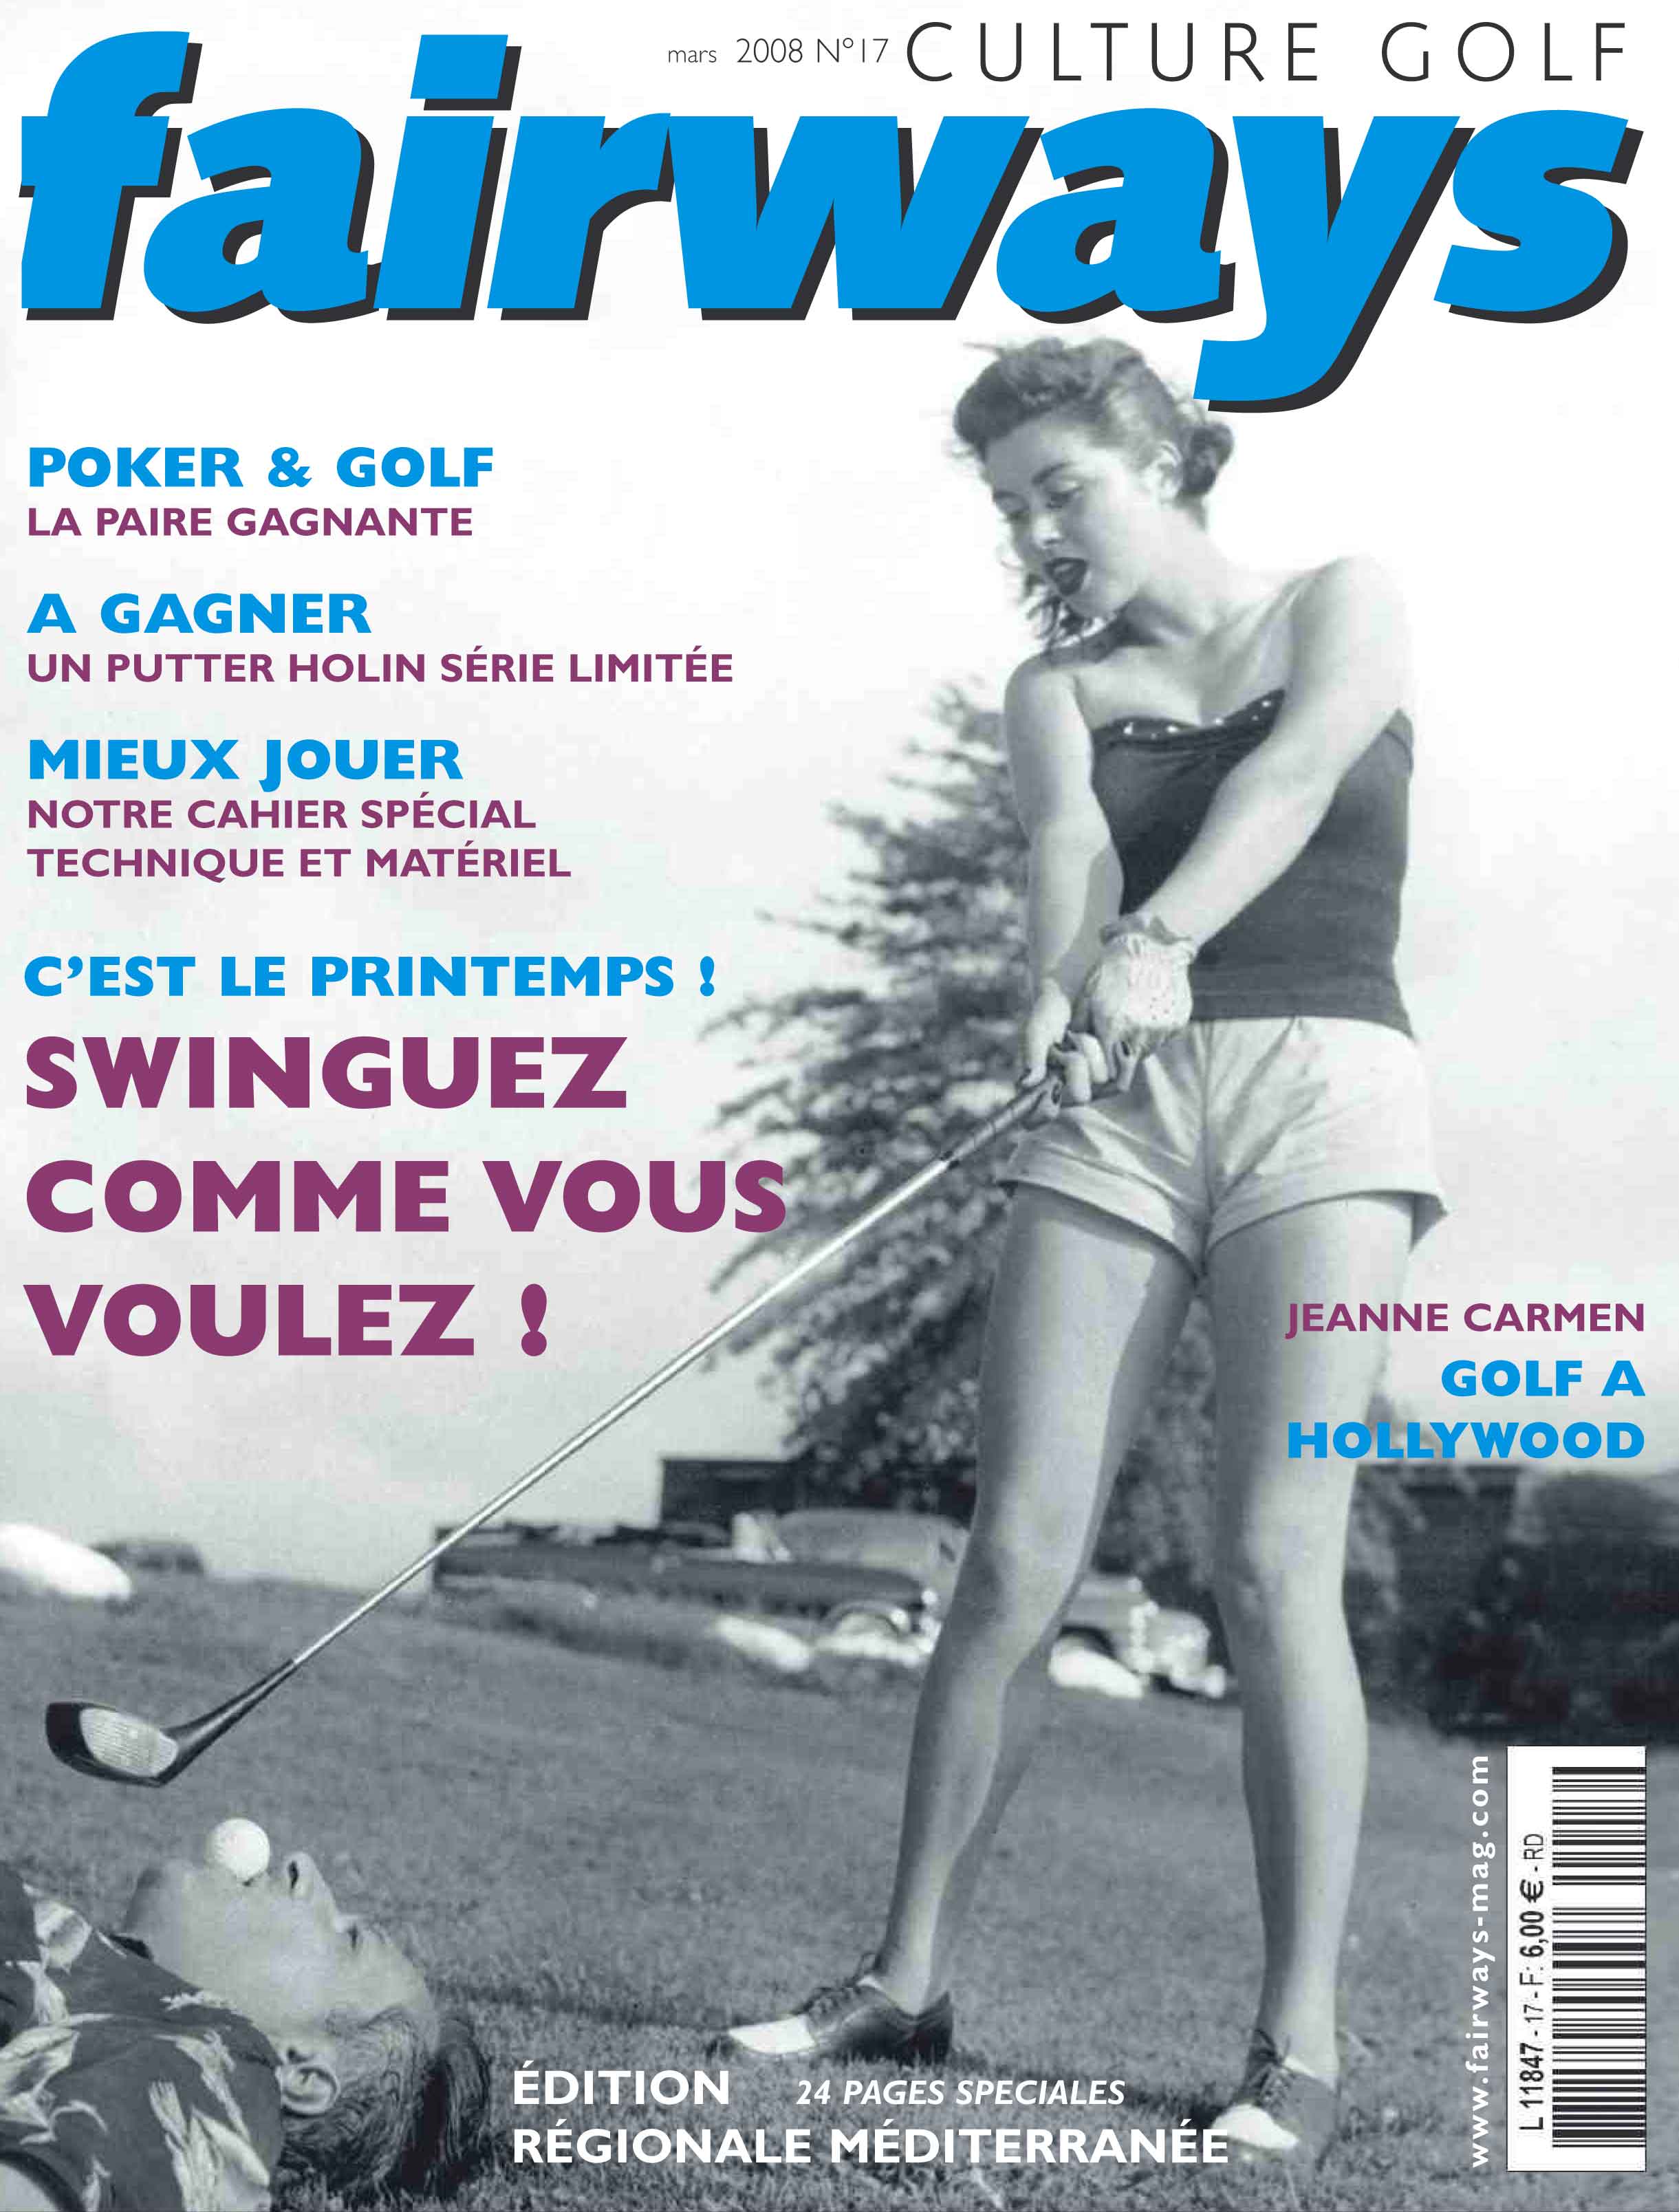 FRANCE - March 2008 Cover Story